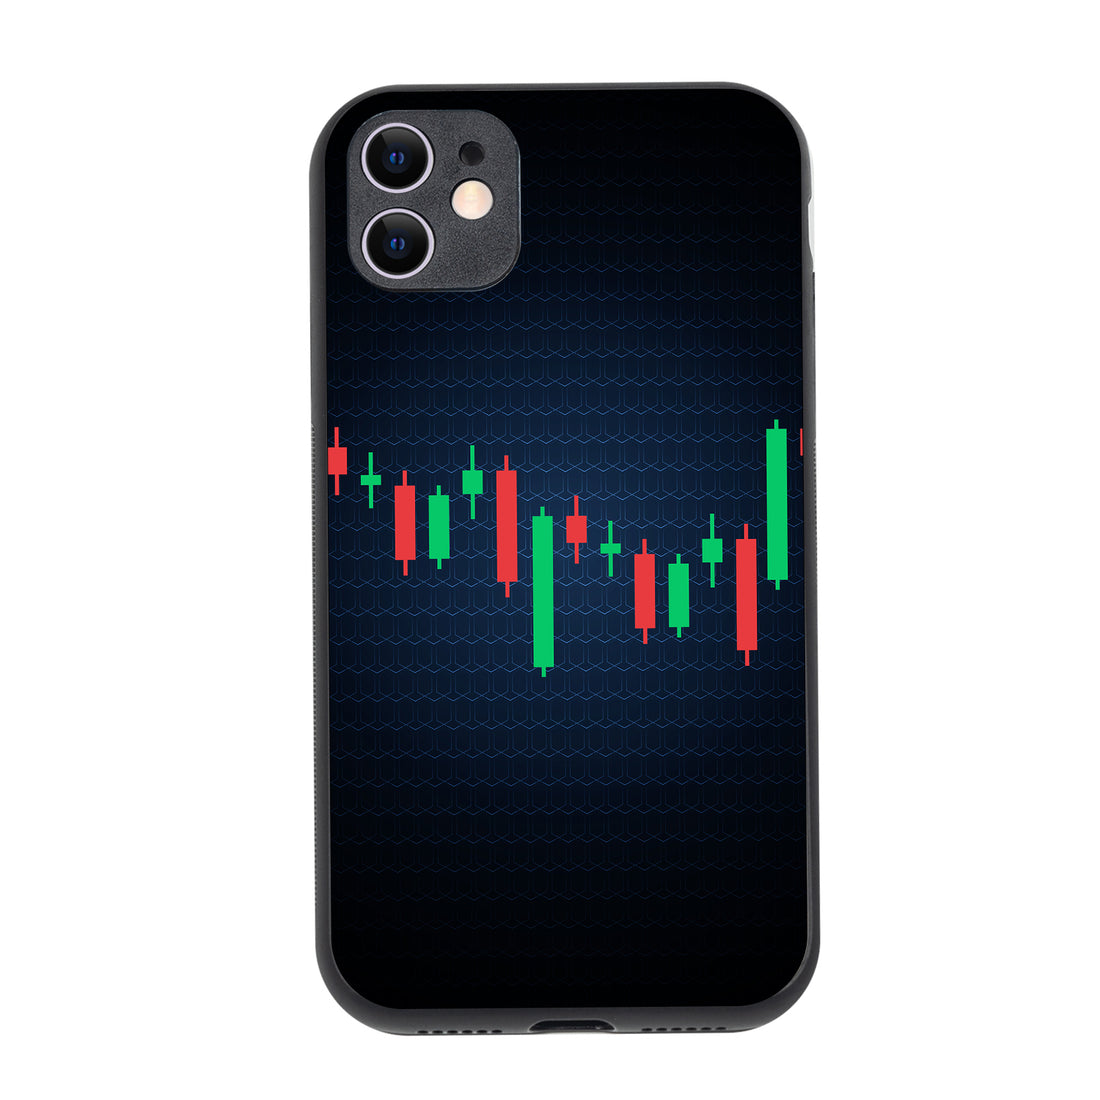 Candlestick Trading iPhone 11 Case